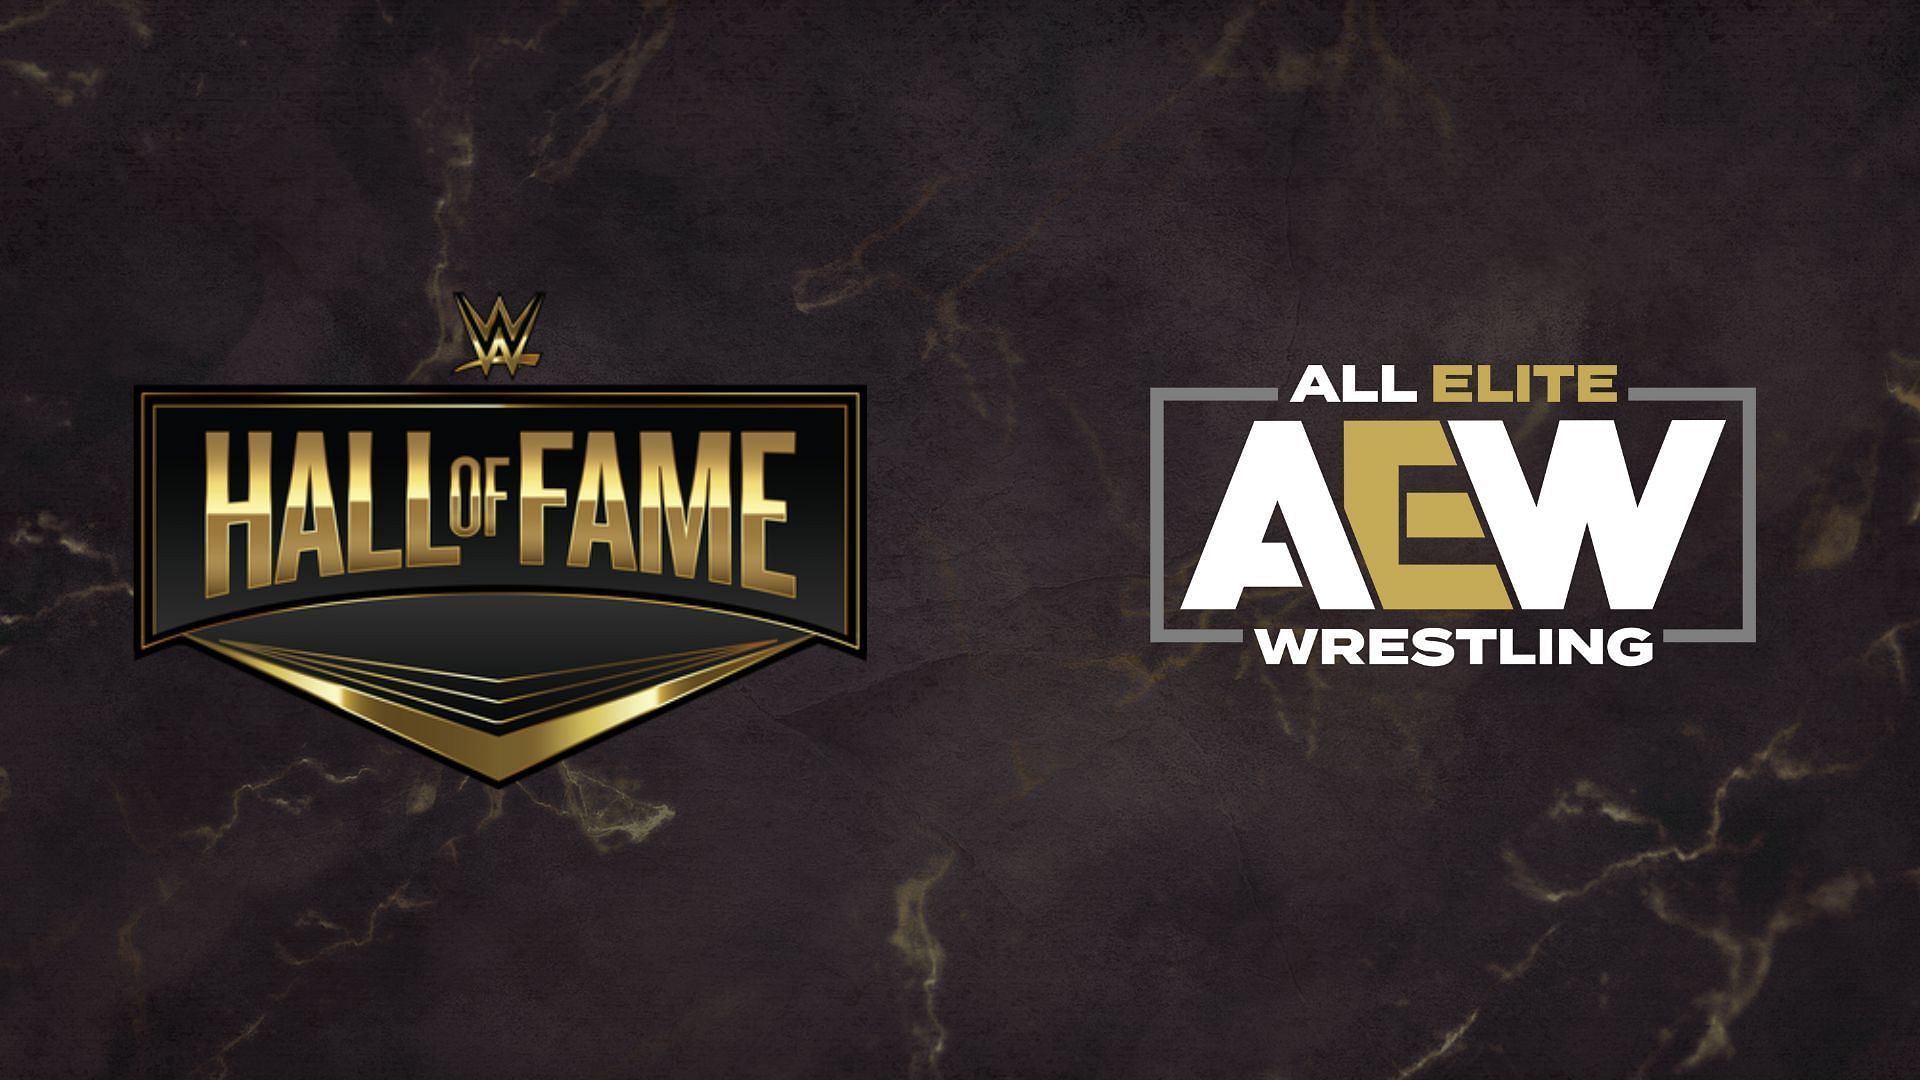 AEW has given a platform to many WWE Veterans and Hall of Famers to reinvent